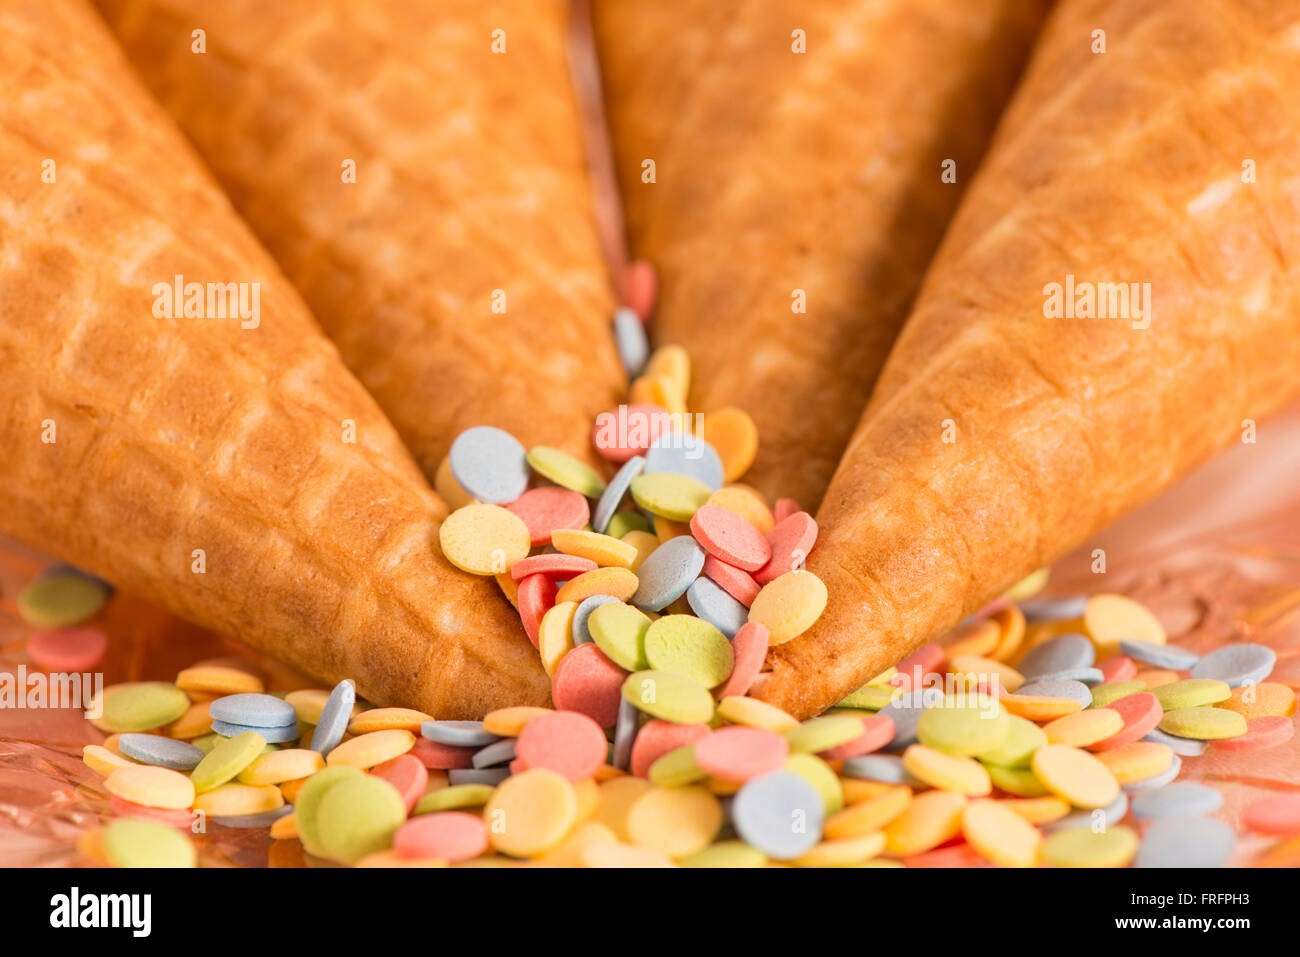 Colorful sugar sprinkles and ice cream cones. Preparation for party or celebration. Concept of birthday styling. Stock Photo